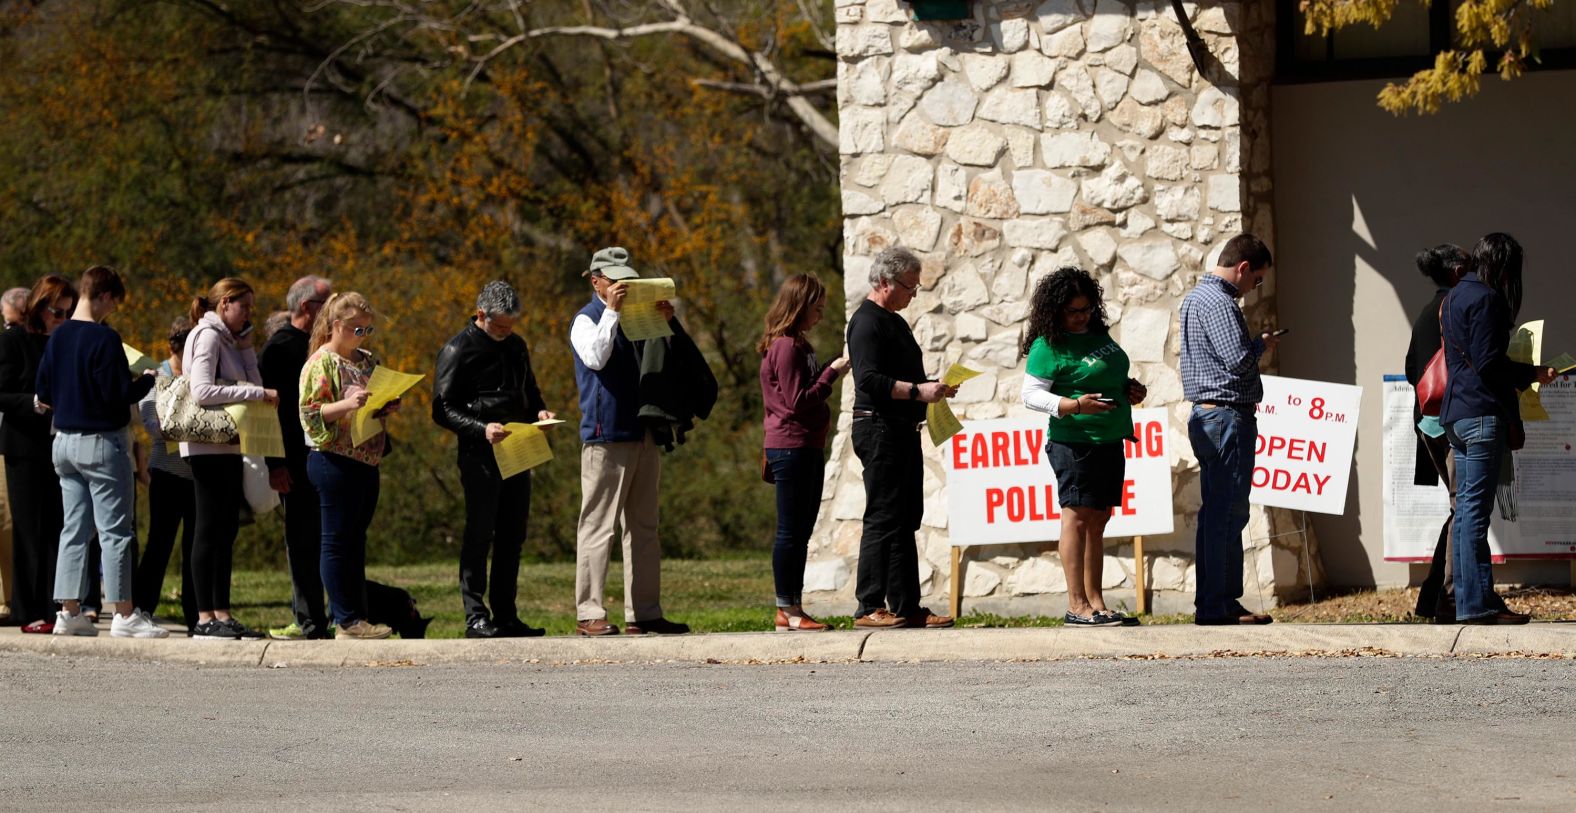 People in San Antonio wait in line for early voting on Friday.